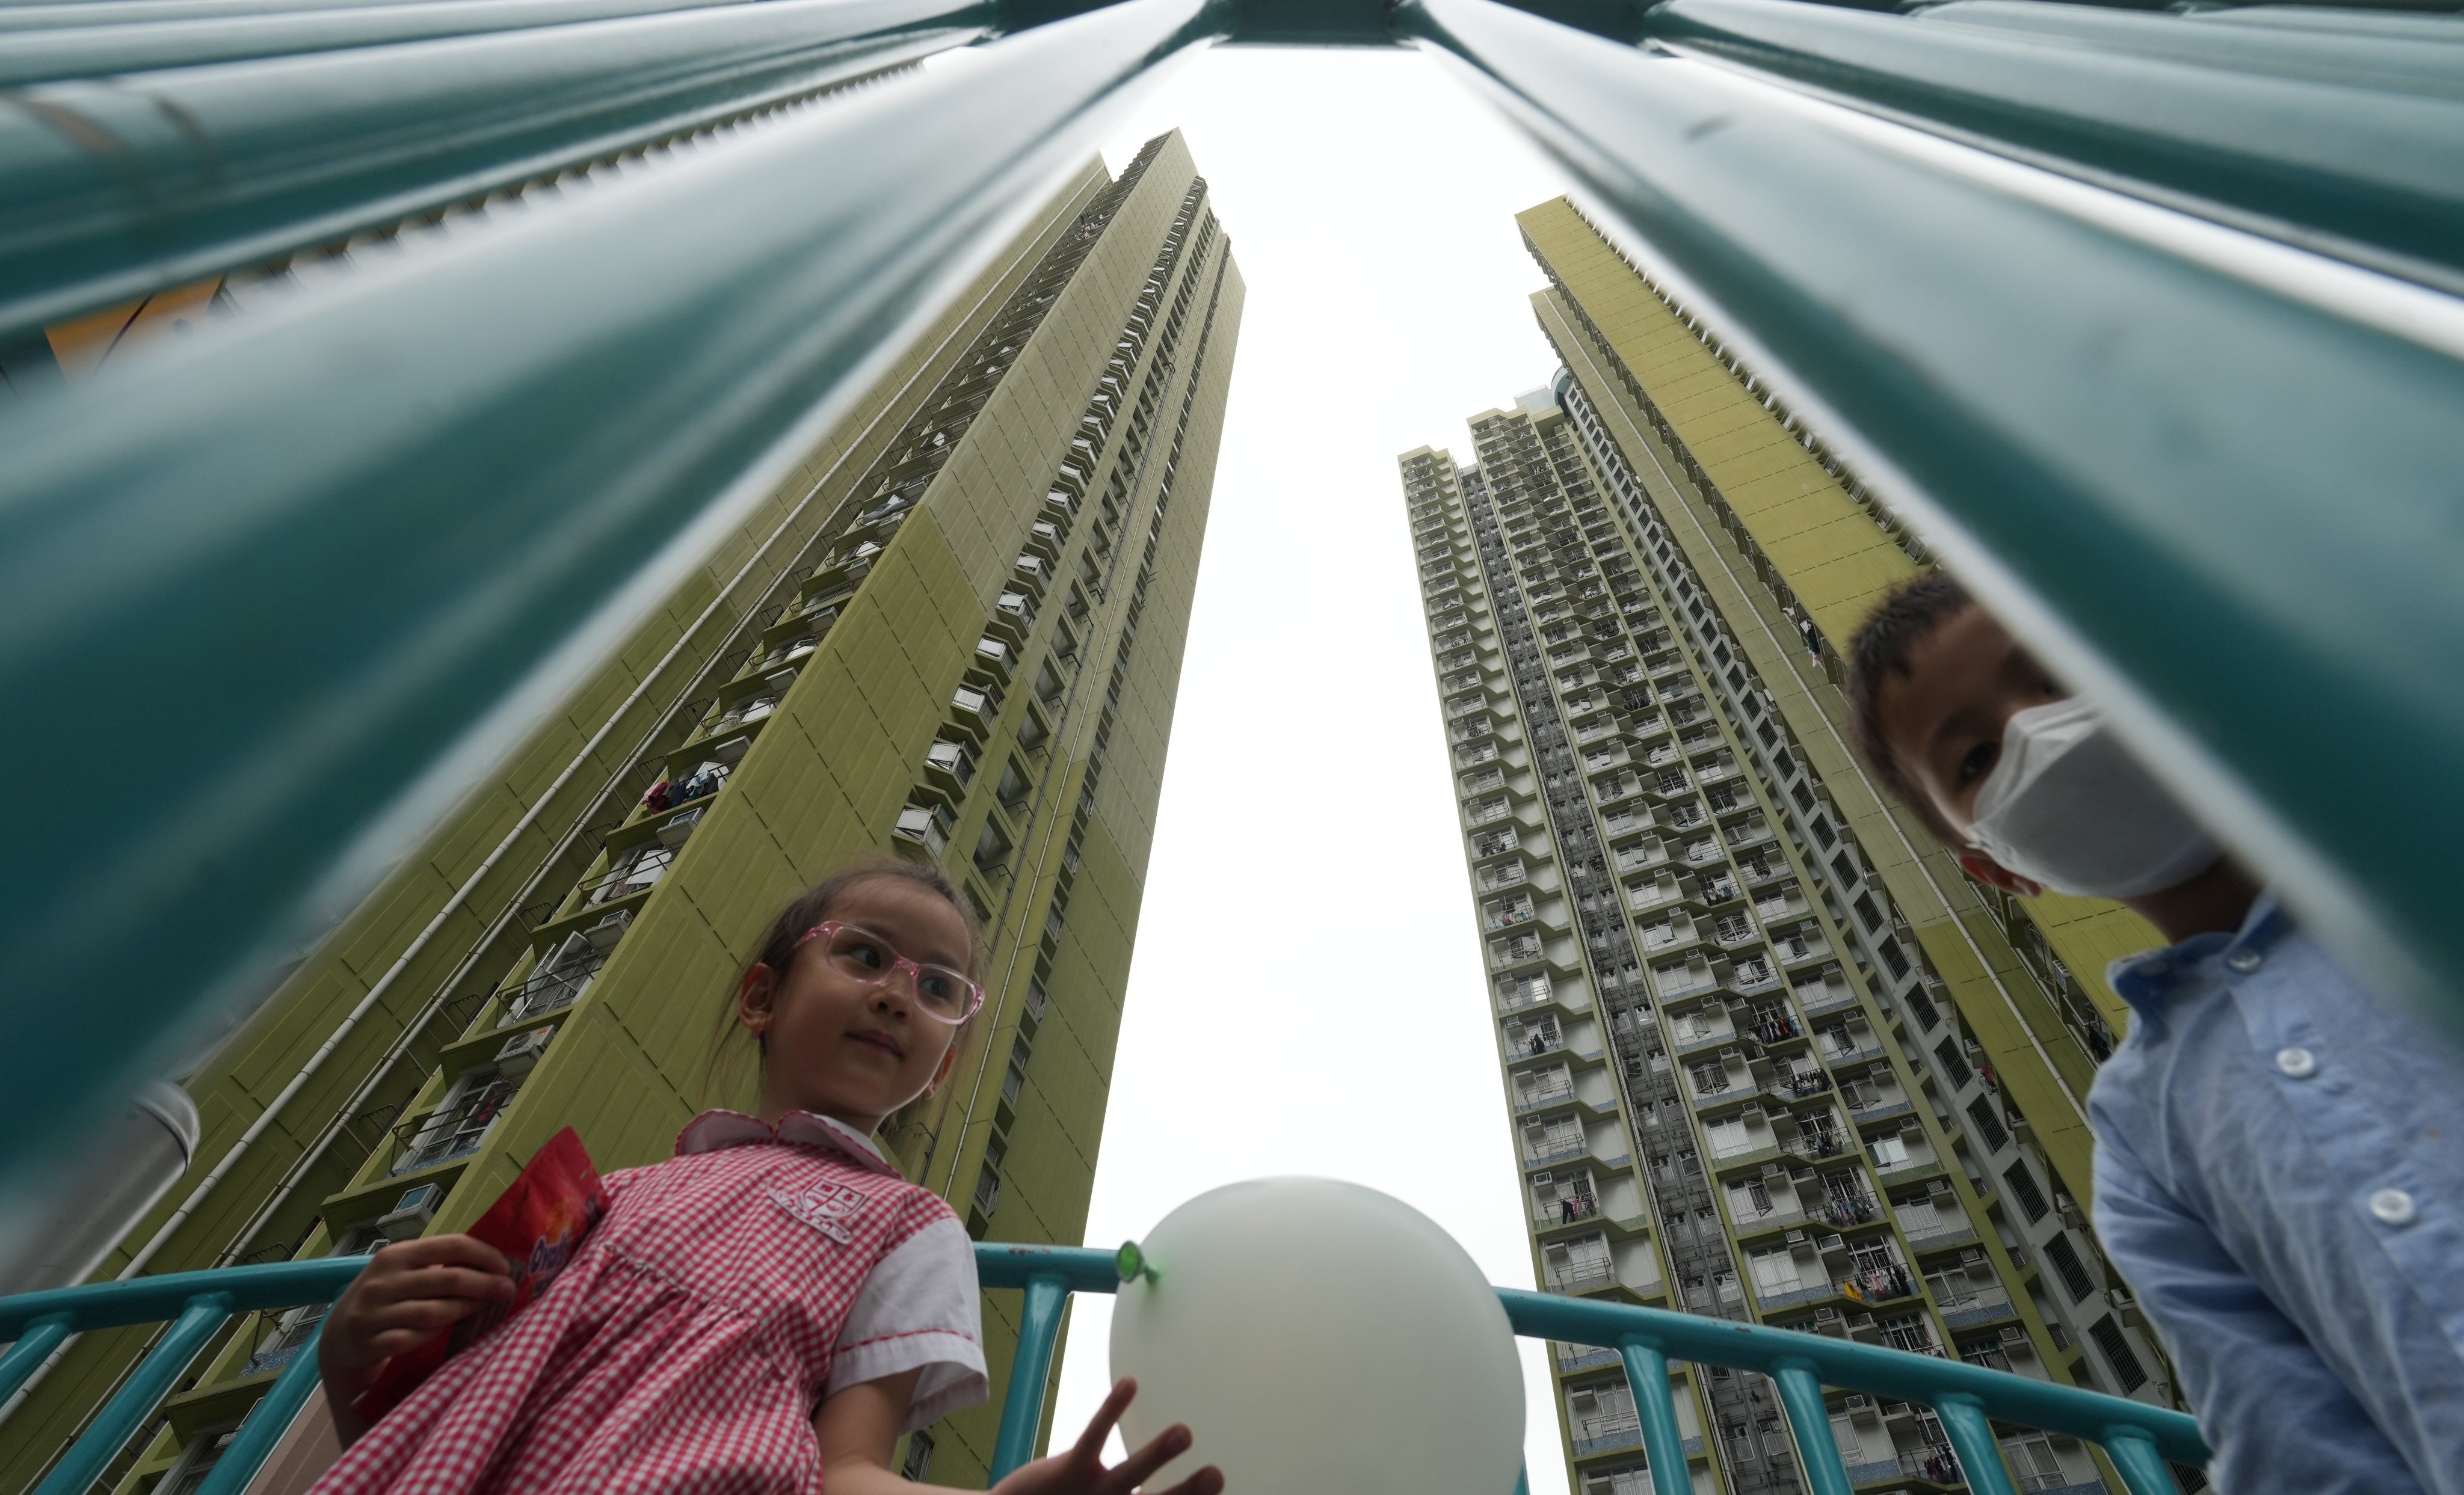 Children play at a public housing estate in Cheung Sha Wan on May 11. The increased supply of subsidised housing offers a competitive alternative to small flats in the private housing market. Photo: Sam Tsang